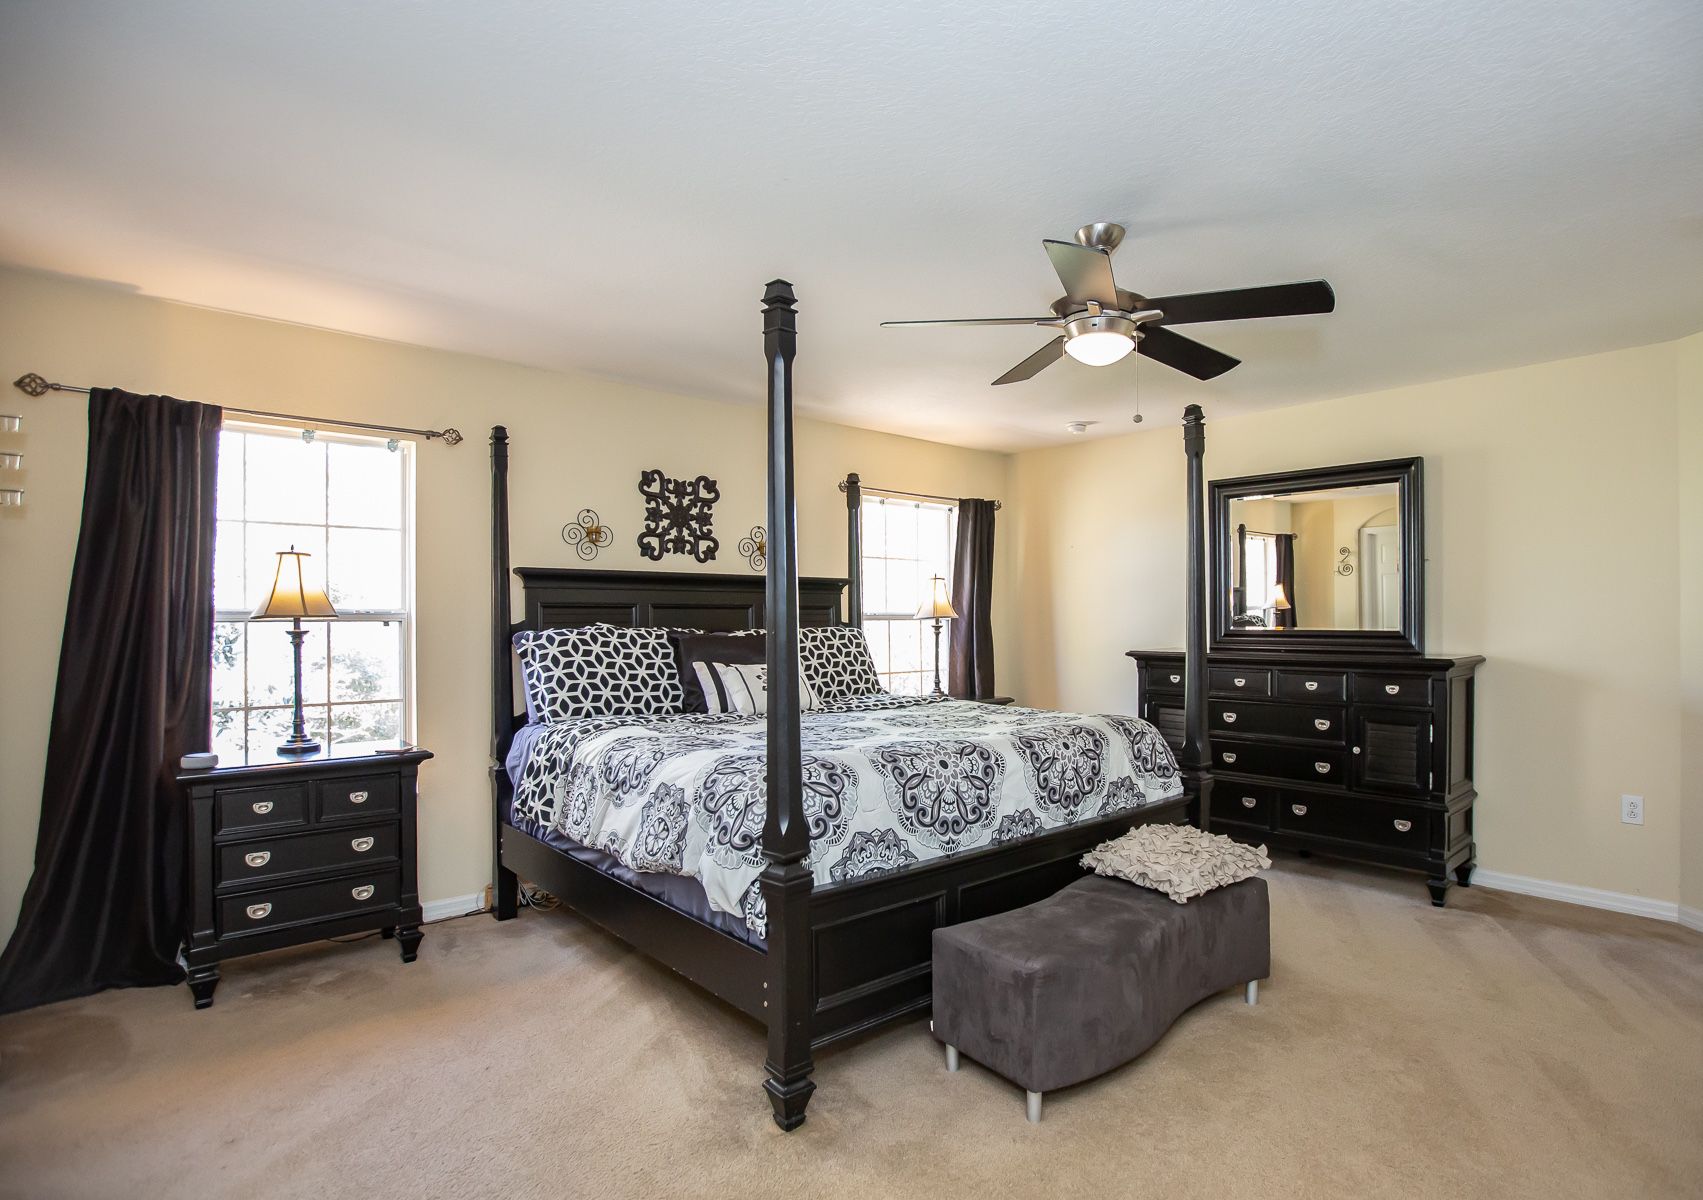 Rooms To Go Master bedroom Set, King for Sale in Orlando, FL